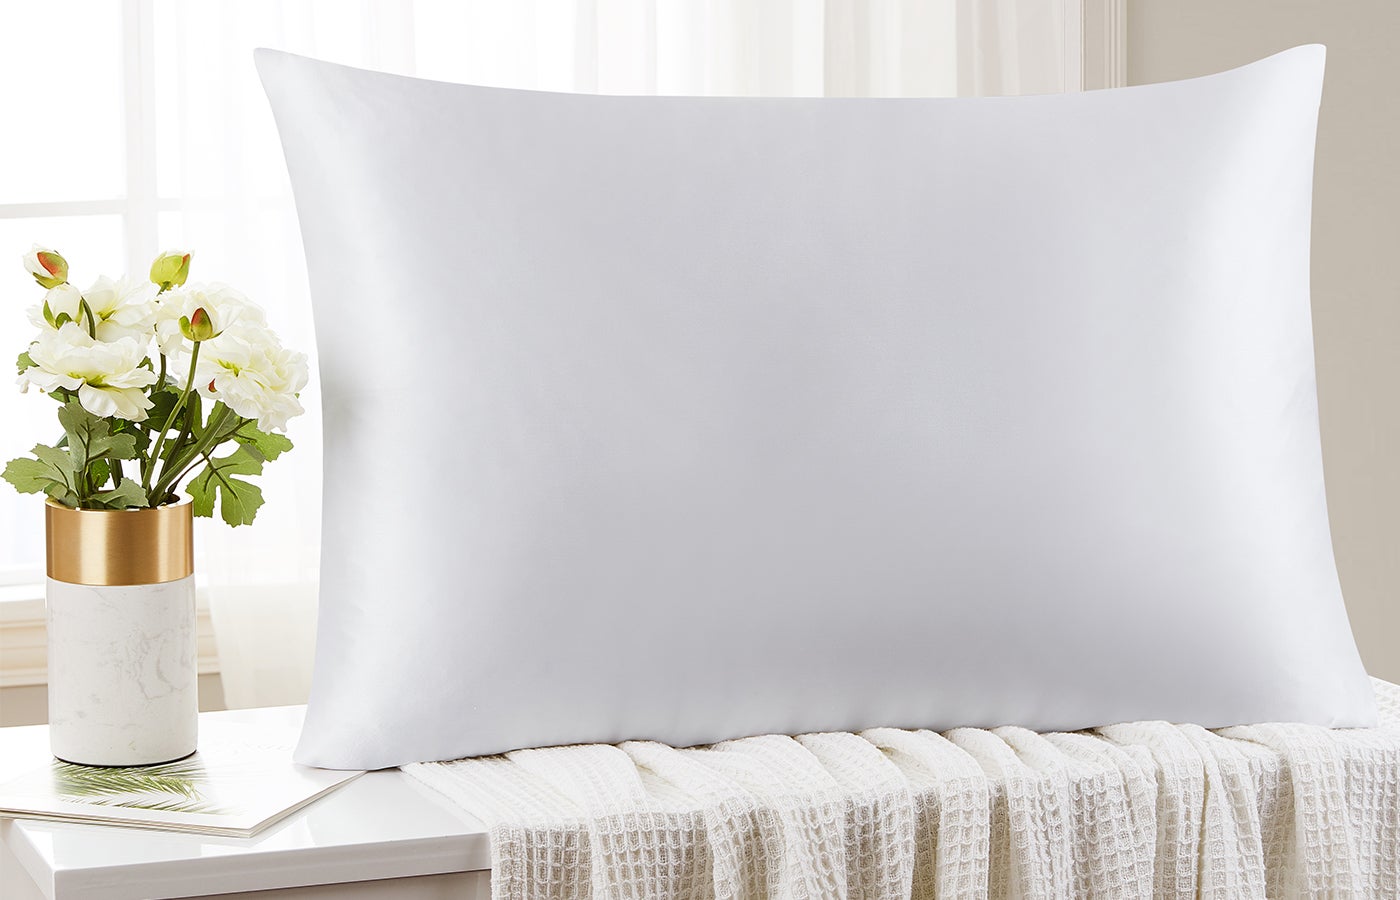 Give The Gift Of Good Sleep With These Thoughtful Gifts This Holiday